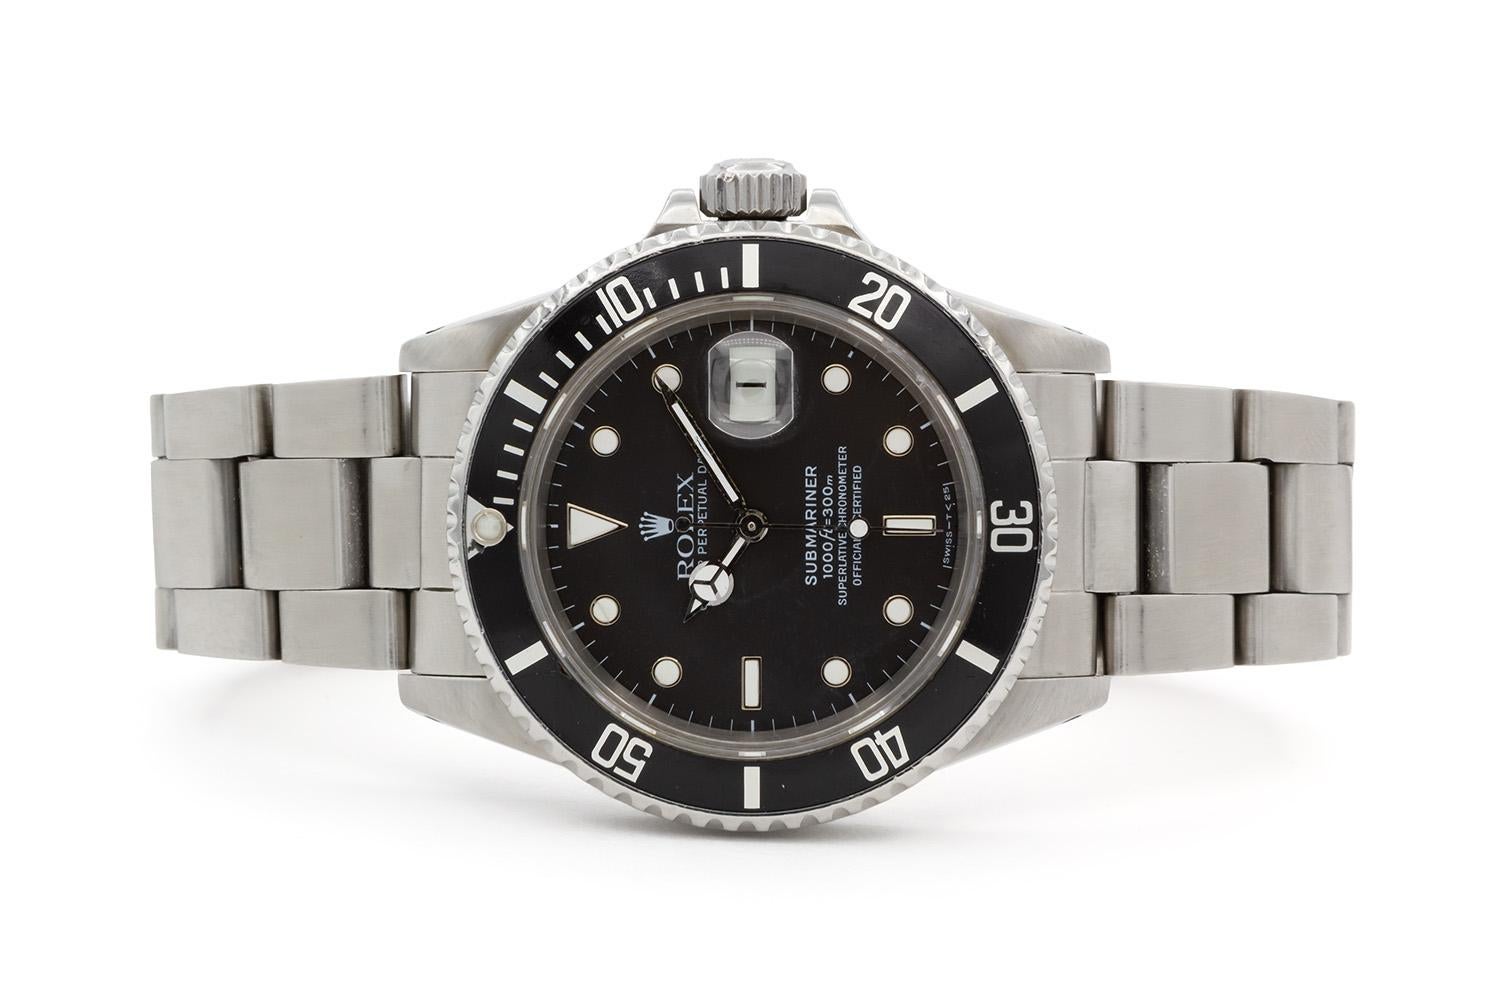 We are pleased to offer this Vintage 1985 Rolex Stainless Steel Submariner 16800. This classic and highly sought after Rolex sport watch features a 40mm stainless steel case, factory original black metal insert time-lapse bezel and factory original